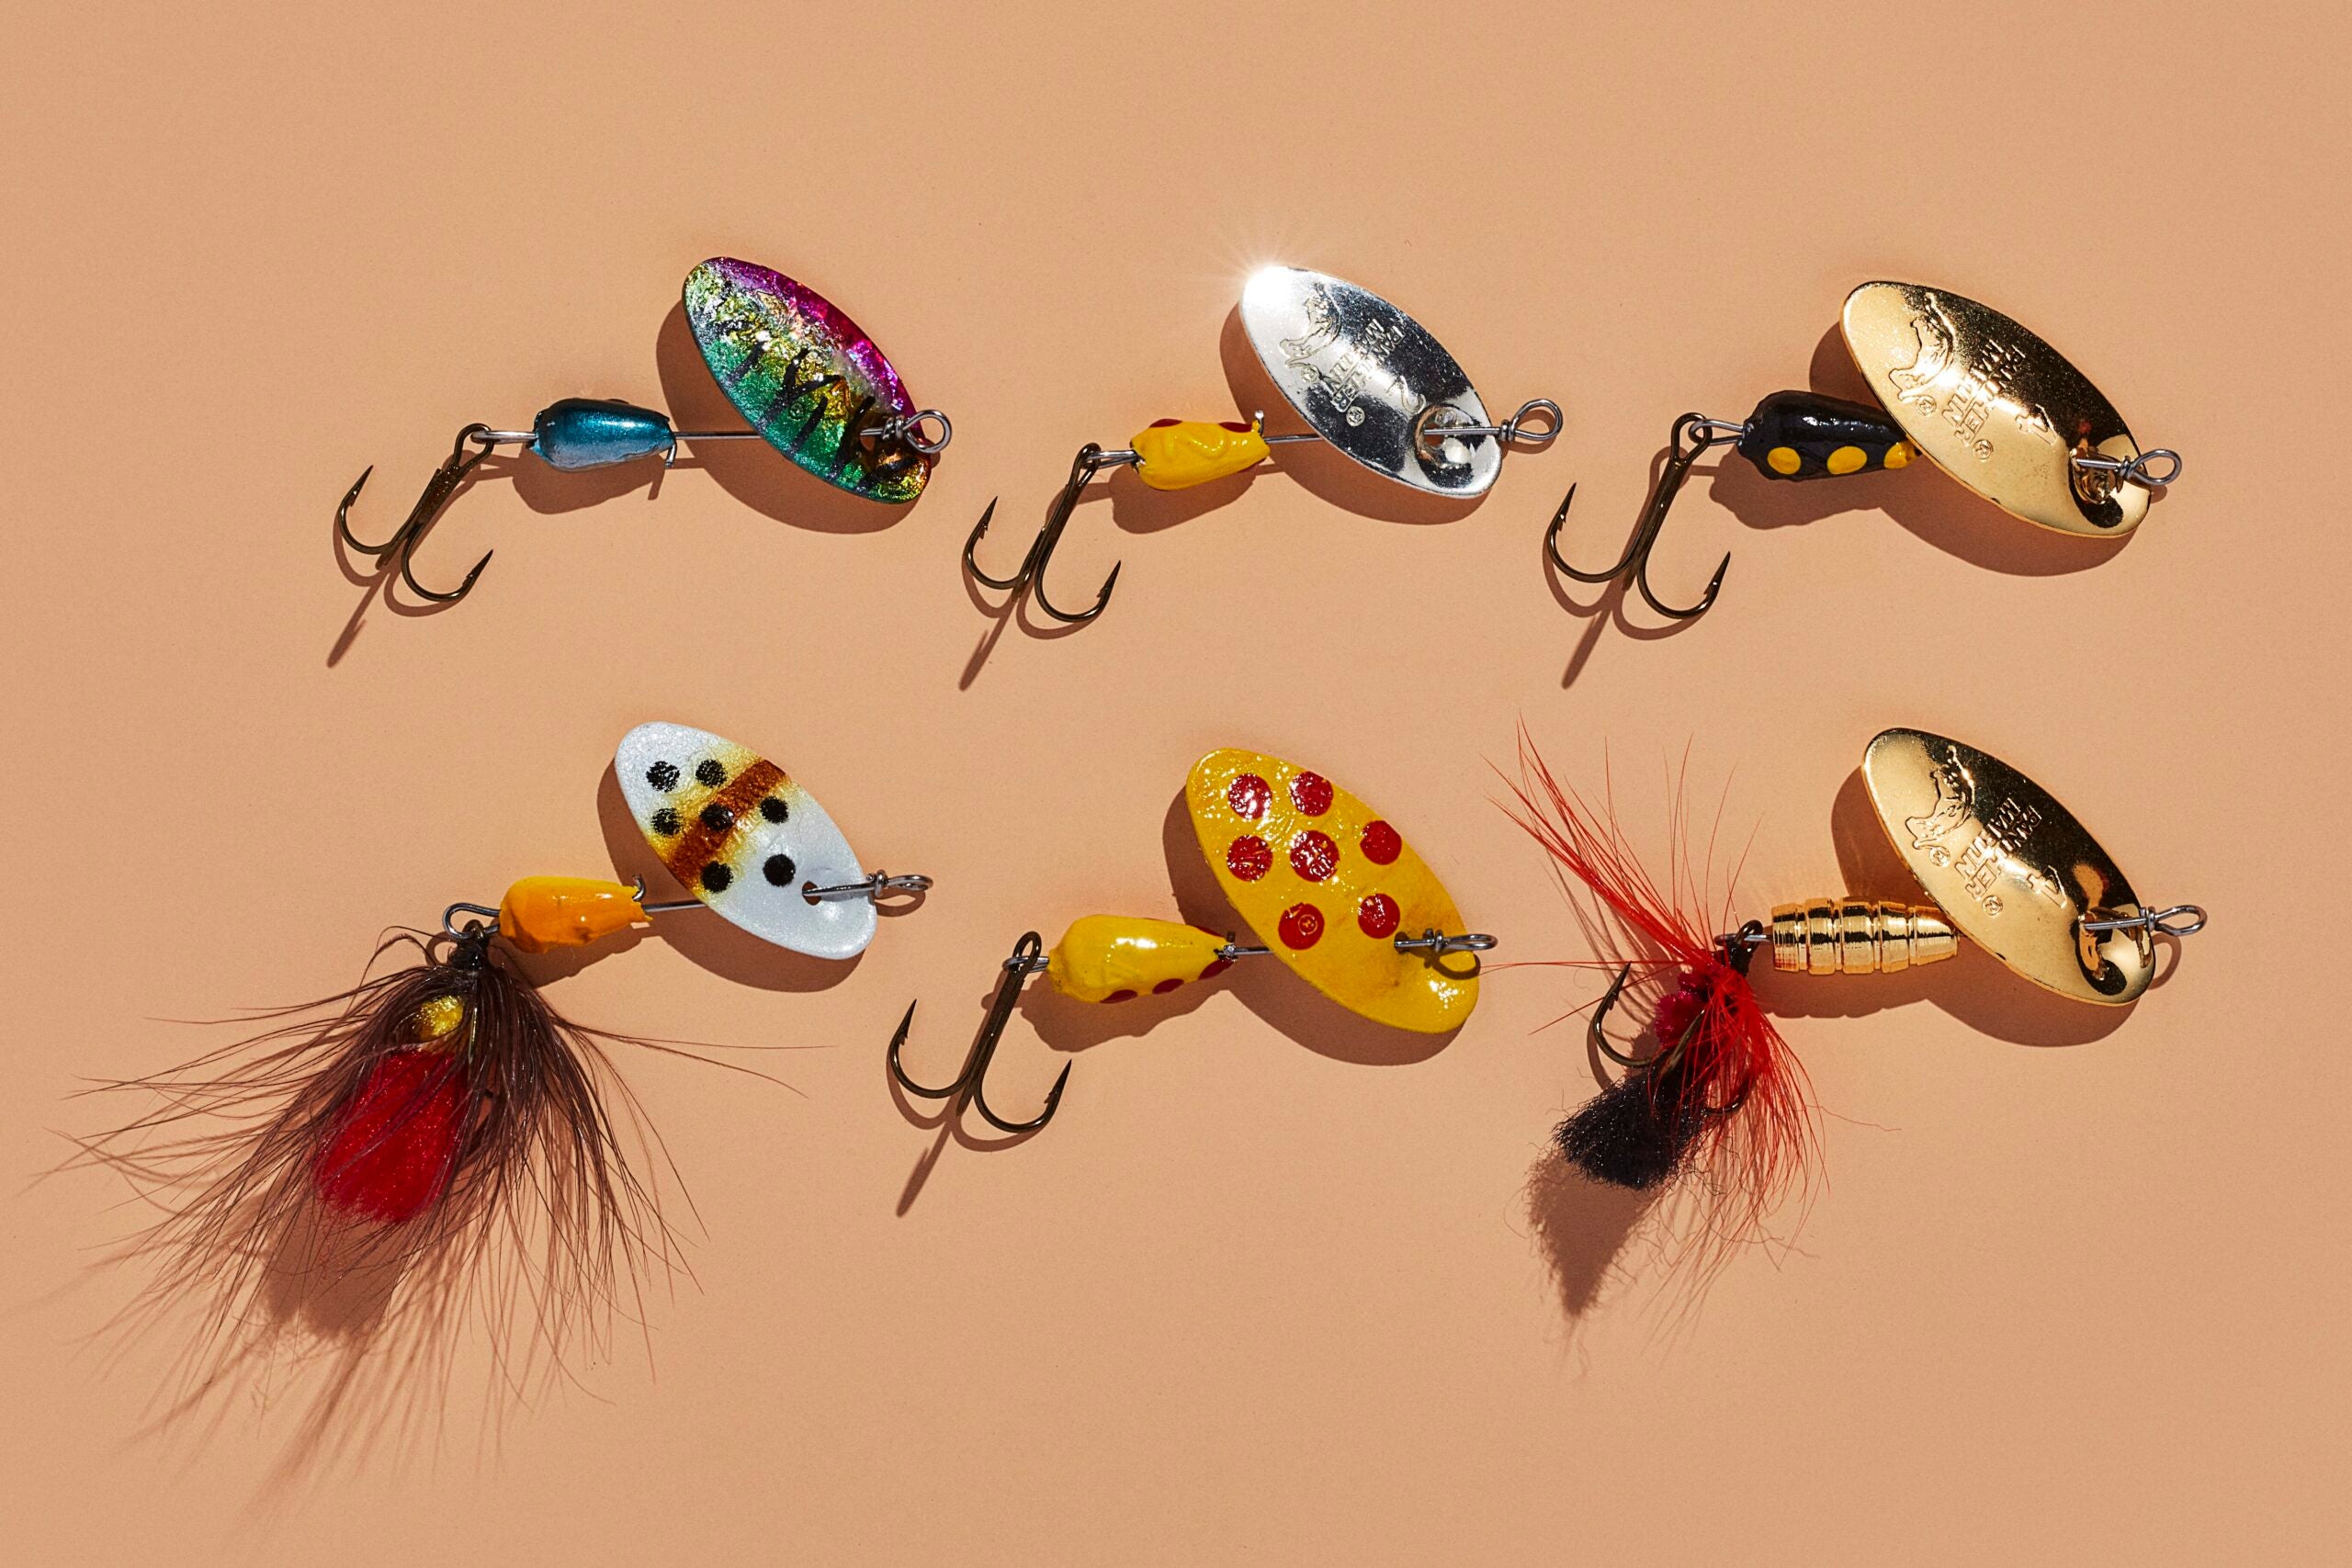 The 50 Best Fishing Lures of All Time